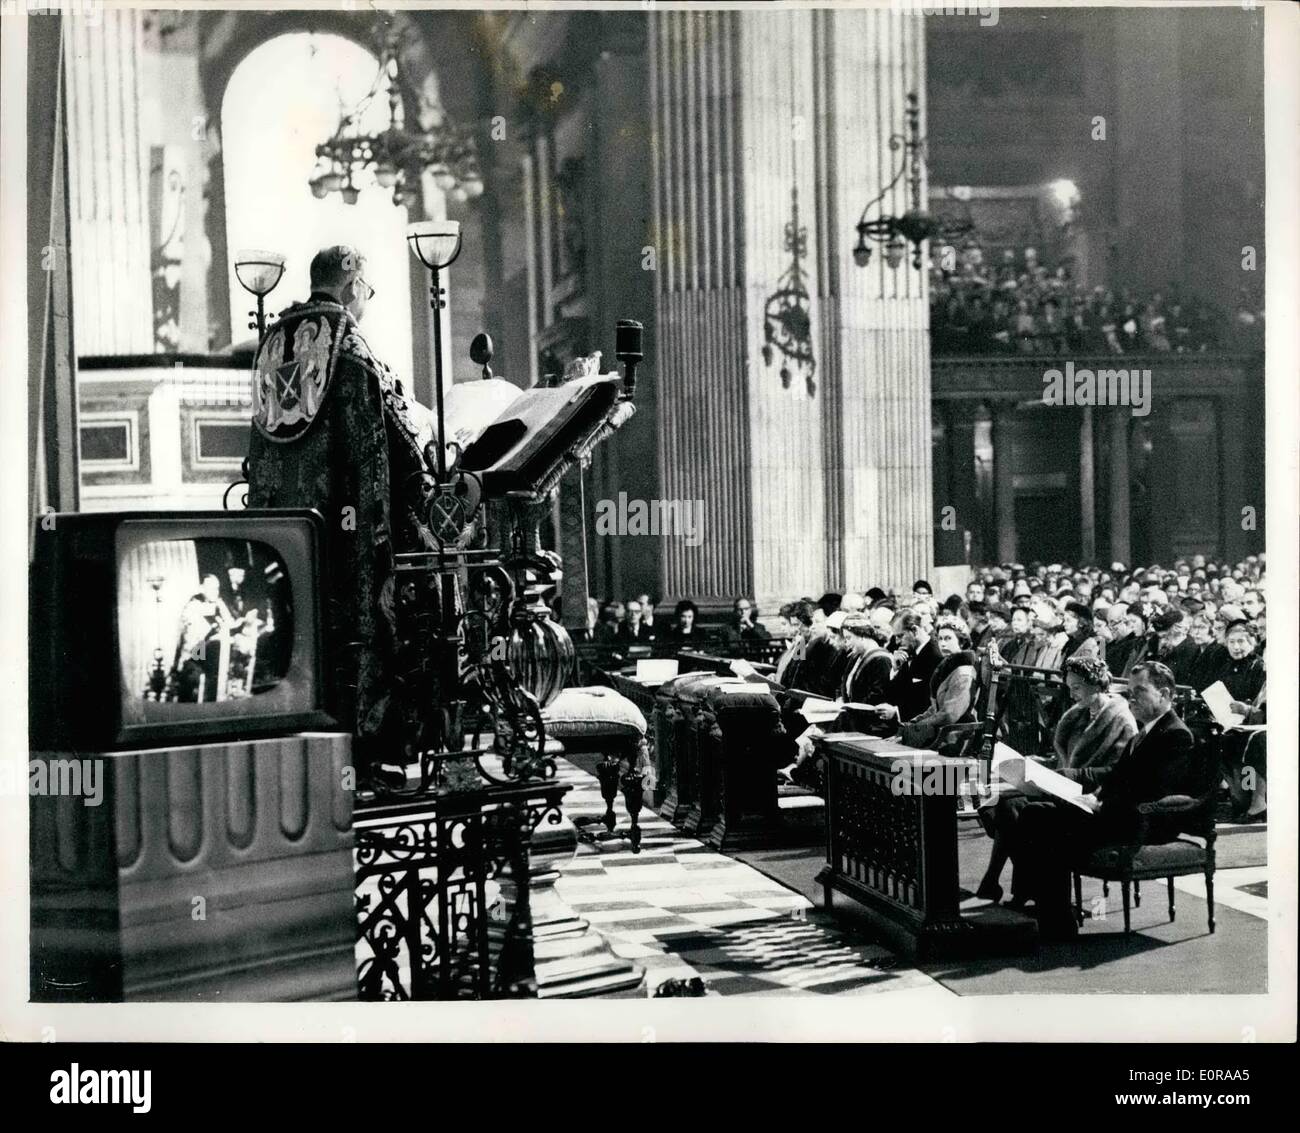 Nov. 11, 1958 - Service at Dedication of American Chapel in St. Paul's Cathedral: Photo shows scene during the service which preceded dedication of the new American Chapel in St. Paul's Cathedral today. The Canon-in-residence reads the lesson - with facing him in front row Right to left Mr. Richard Nixon (American Vice President); Mrs. Nixon; H.M.The Queen; Princess Royal; Duchess of Kent; and Princess Alexandra of Kent. Note the 21inch television set on left. It was one of ten installed so that all those in the congregation could see the ceremony clearly. Stock Photo